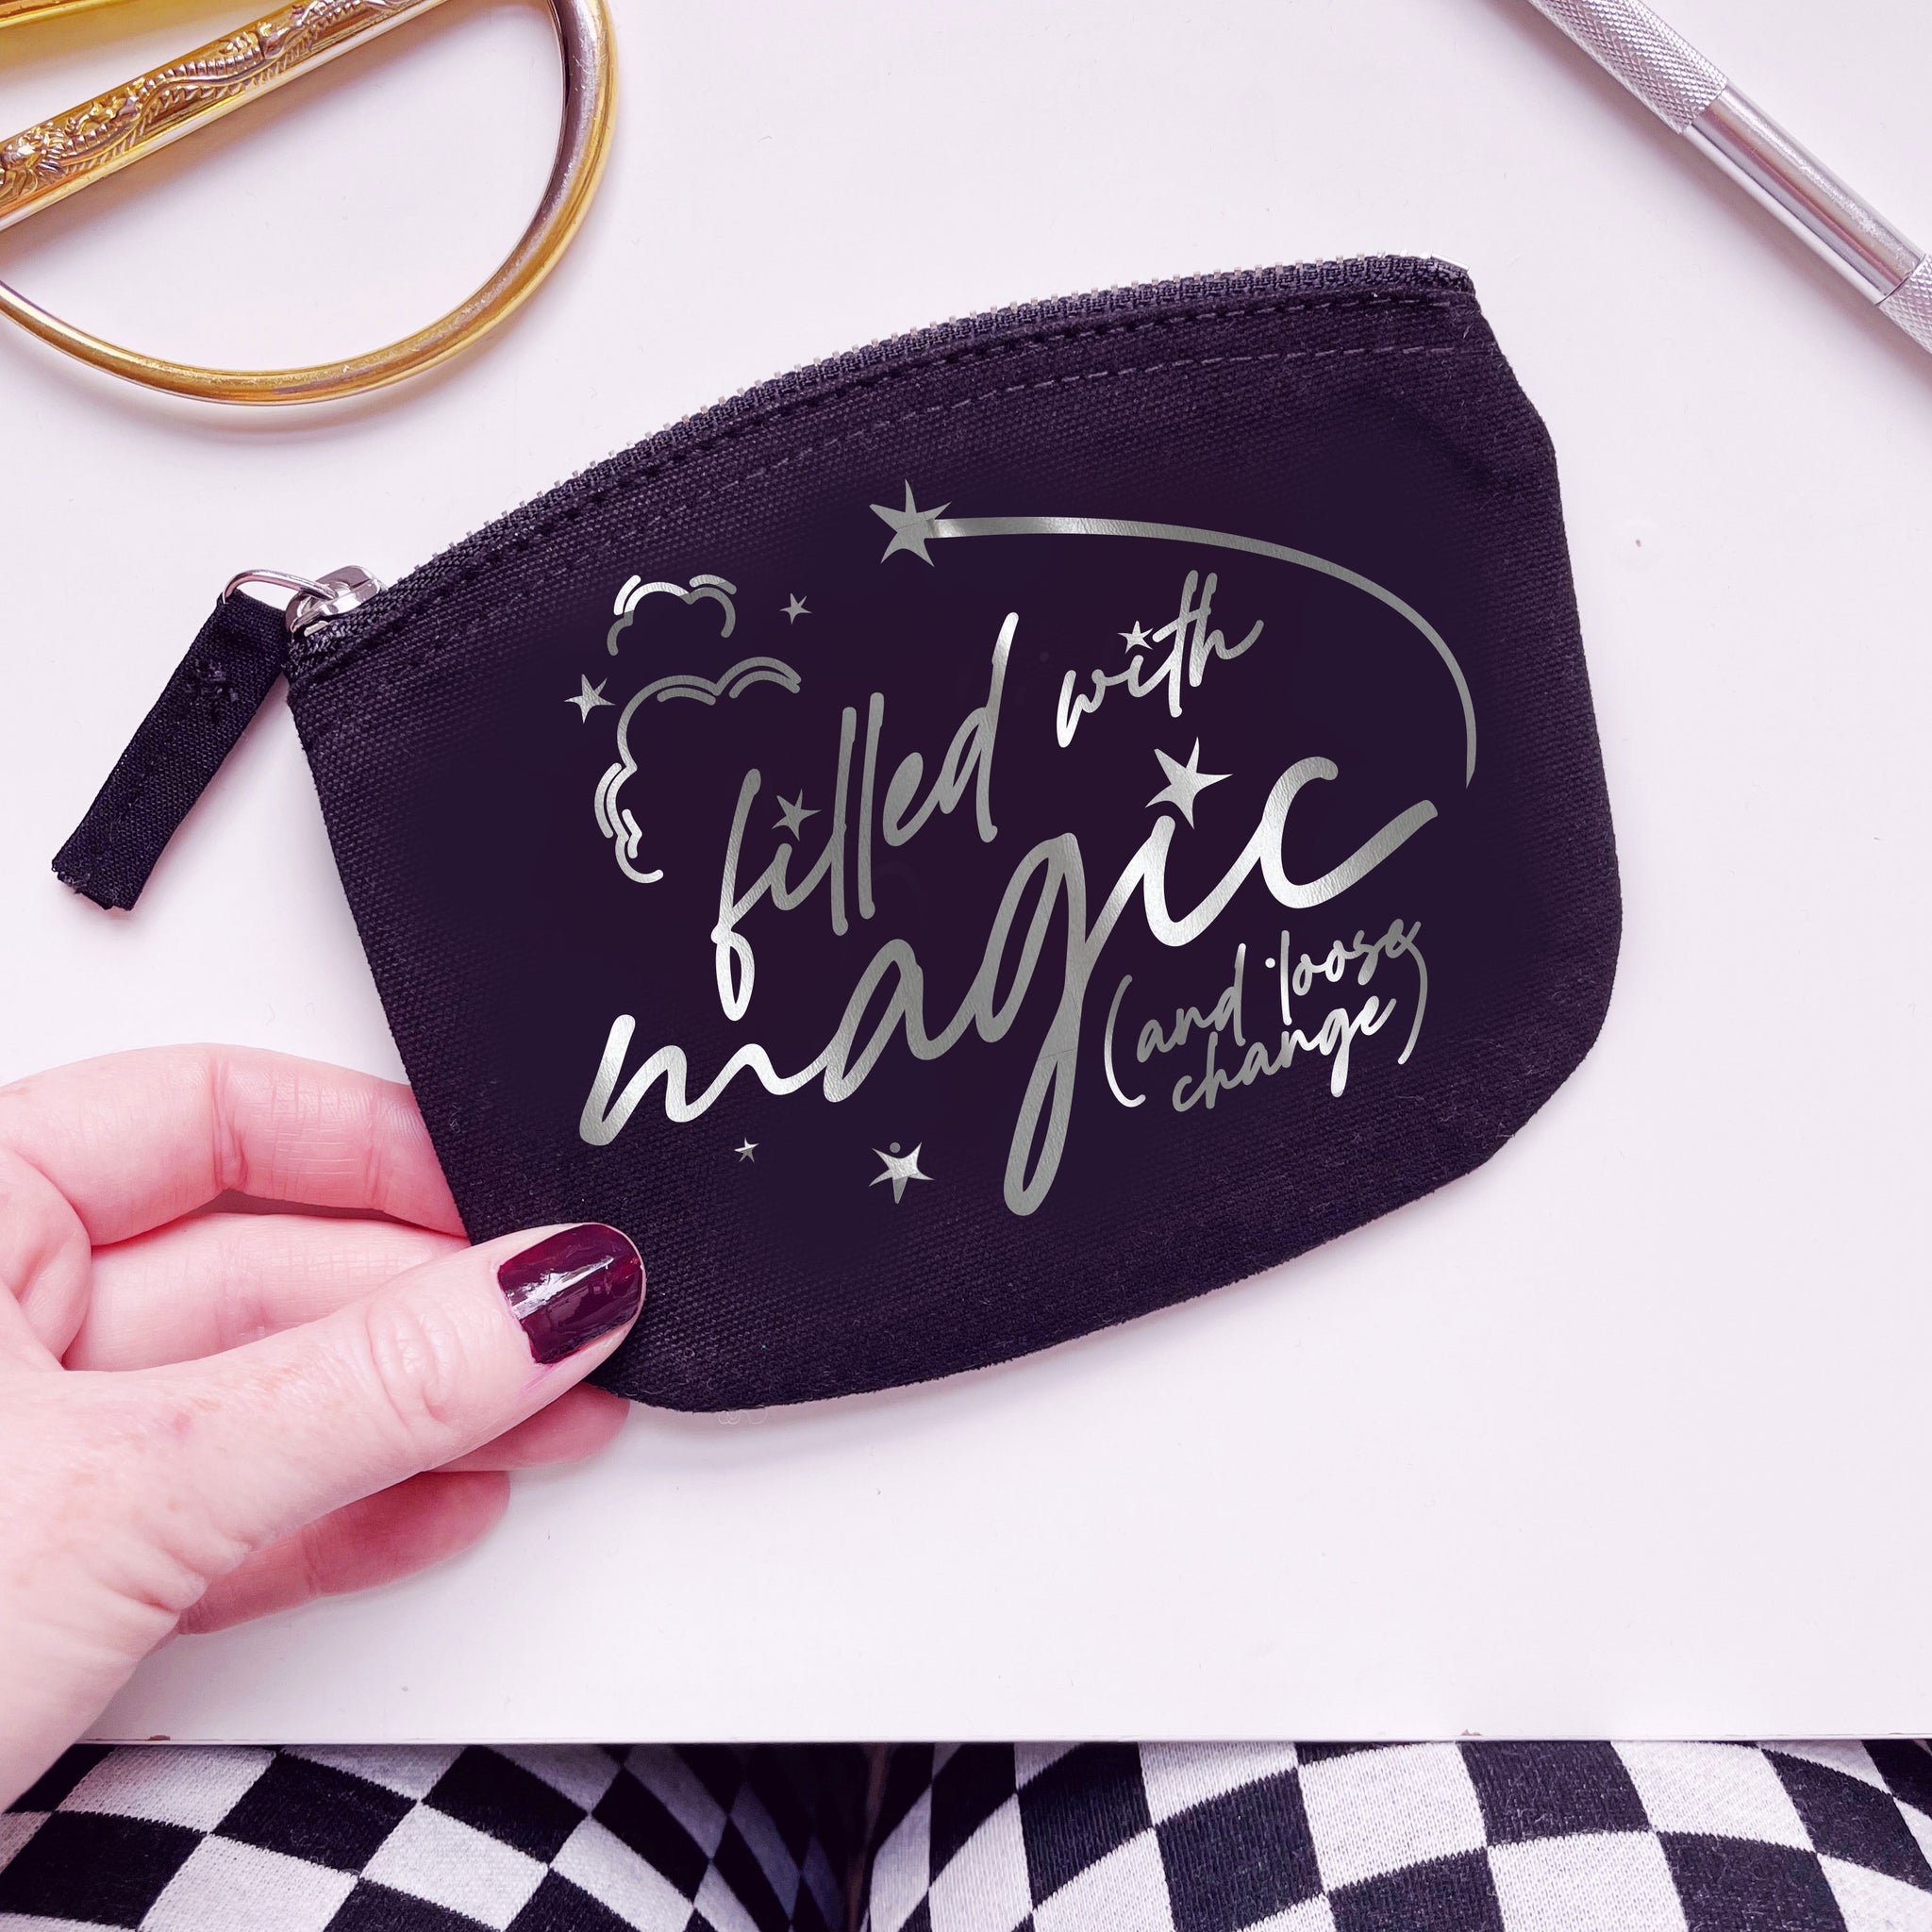 Filled With Magic (and loose change!) - Zip Up Purse